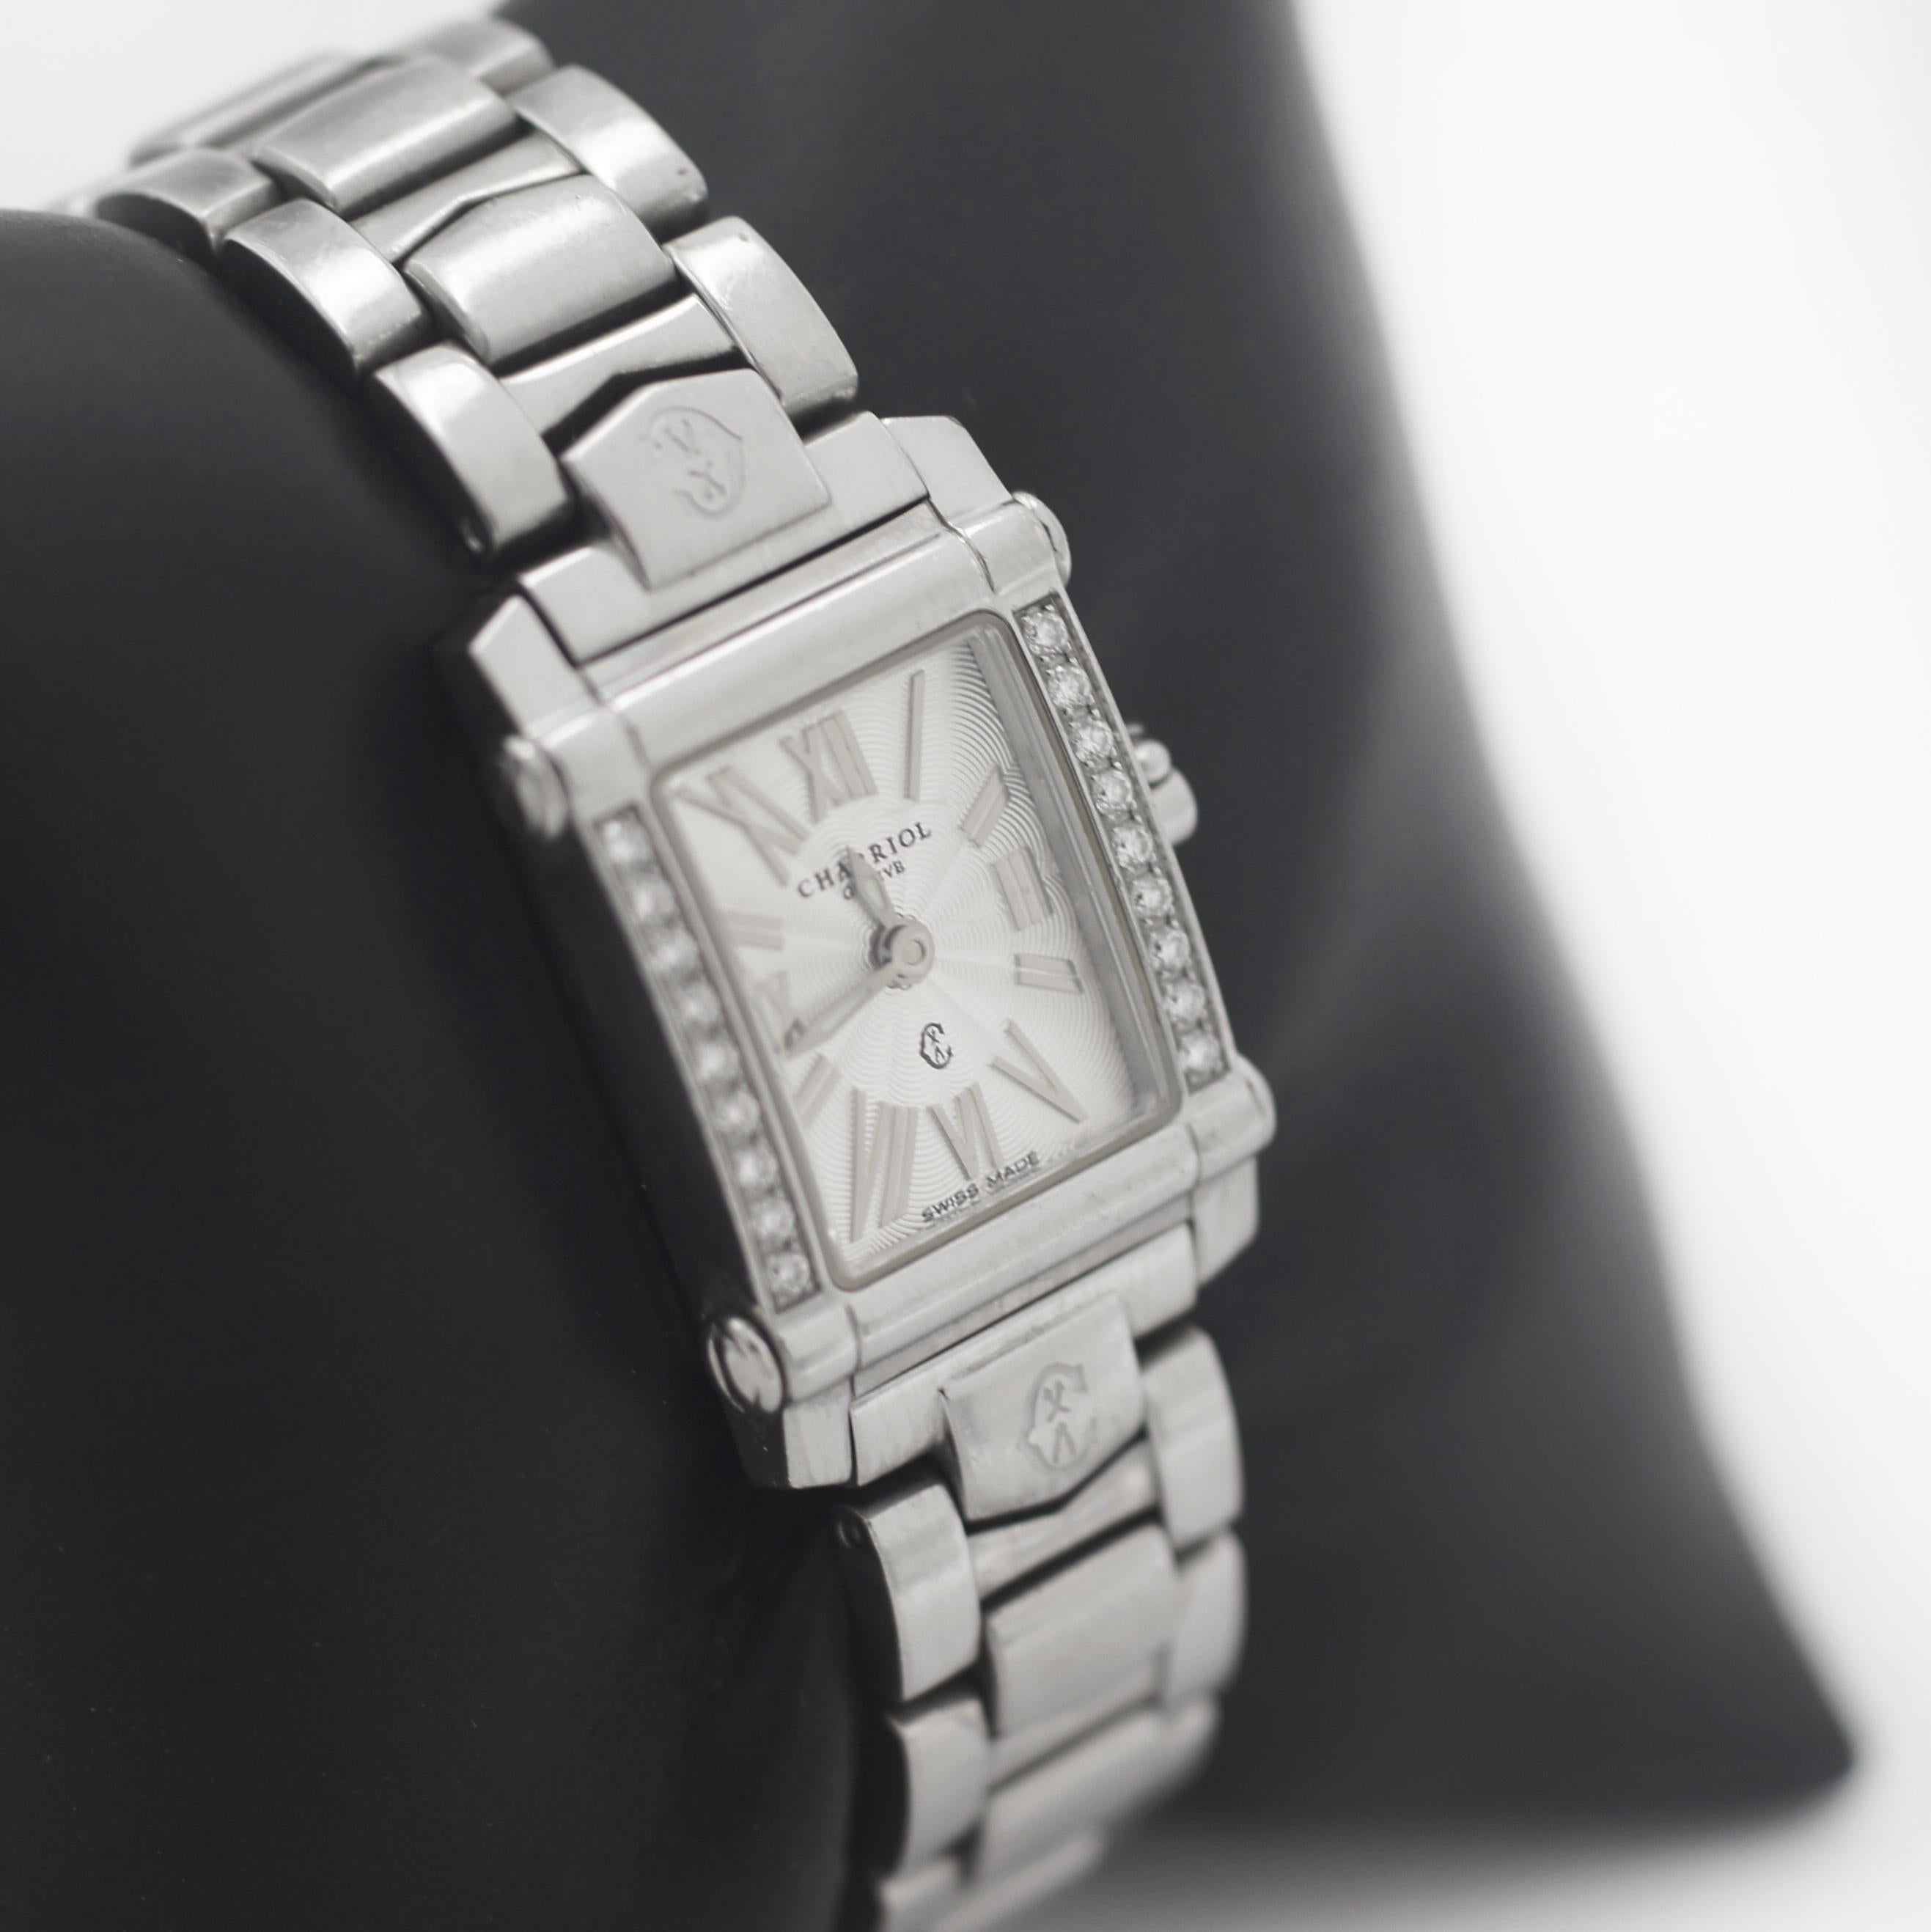 CHARRIOL
Stainless steel
18 full cut Diamonds, approx. total weight .33cts, G, SI1
Case: 28mm
Crystal: Sapphire
Dial: Silver color with Roman numerals
Swiss Made
Water-resistant
Fits approx. 6